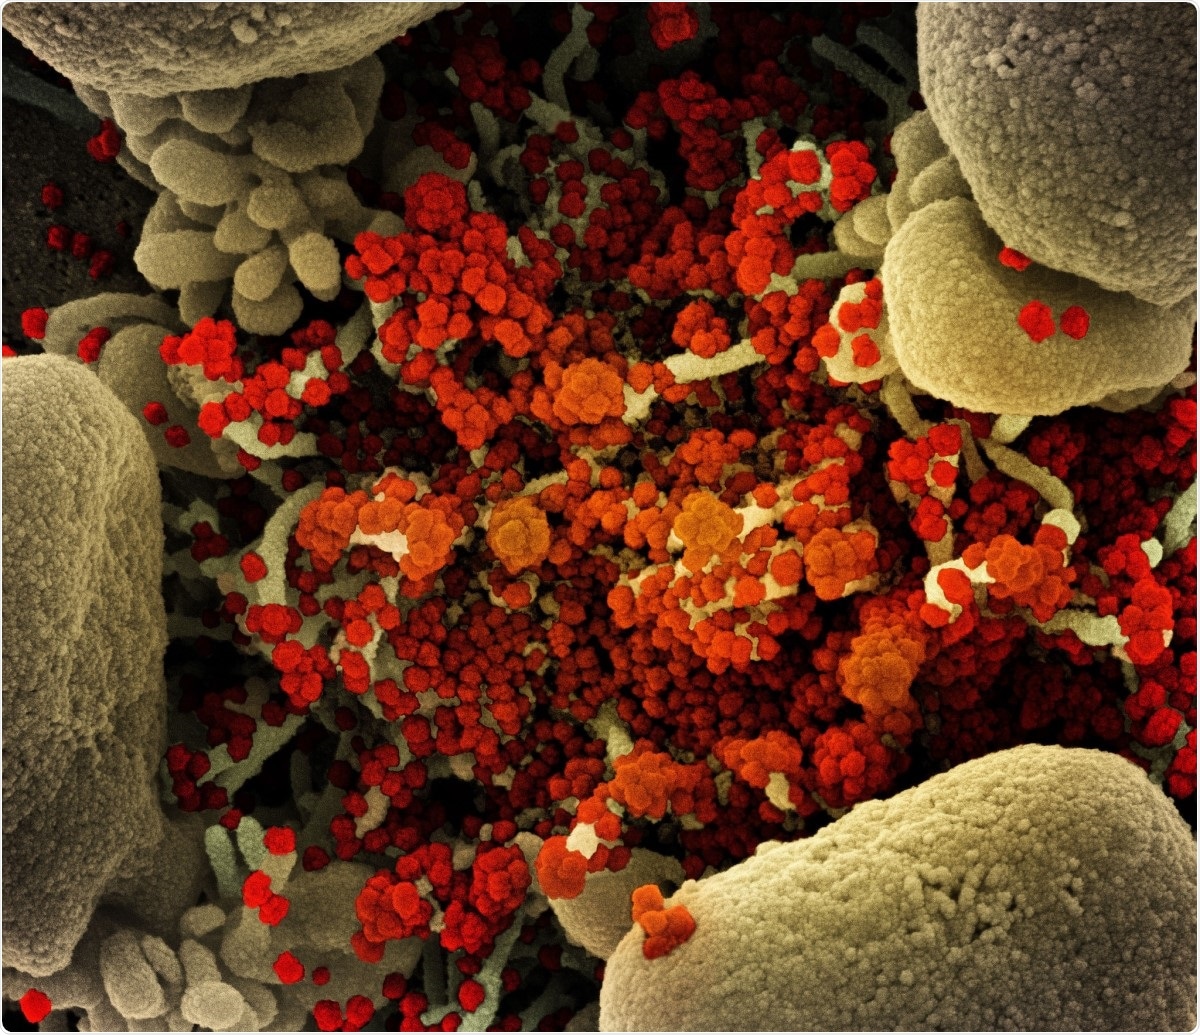 Colorized scanning electron micrograph of an apoptotic cell (tan) heavily infected with SARS-CoV-2 virus particles (orange), isolated from a patient sample. Image captured at the NIAID Integrated Research Facility (IRF) in Fort Detrick, Maryland. Image Credit: NIAID / Flickr